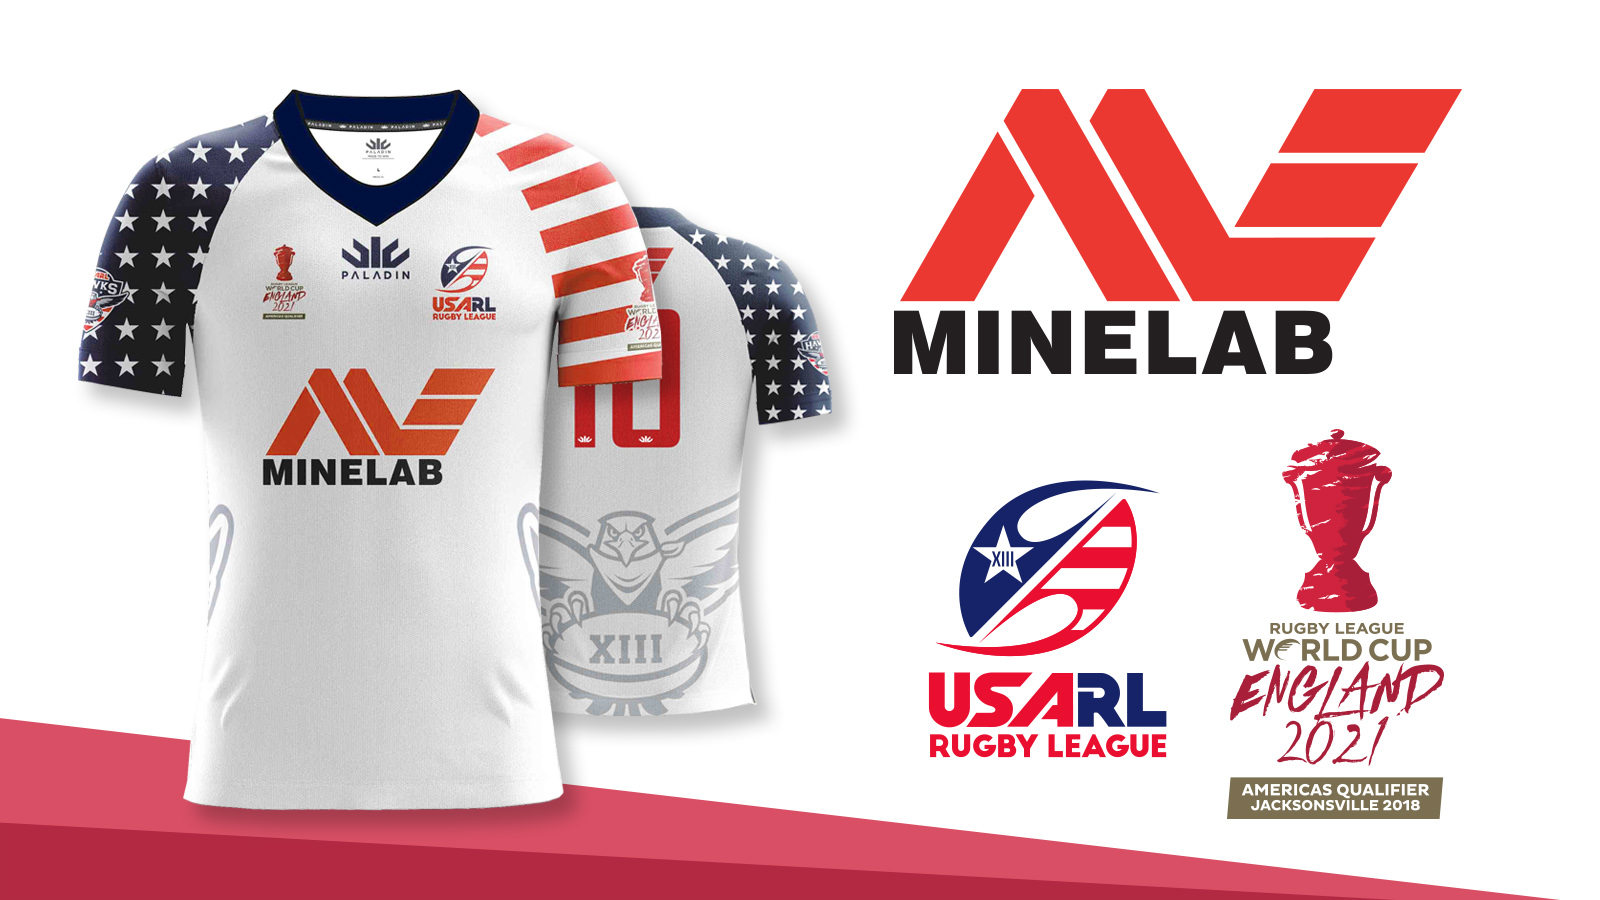 Minelab partners with USA for title sponsorship at Rugby League World Cup Americas Qualifiers